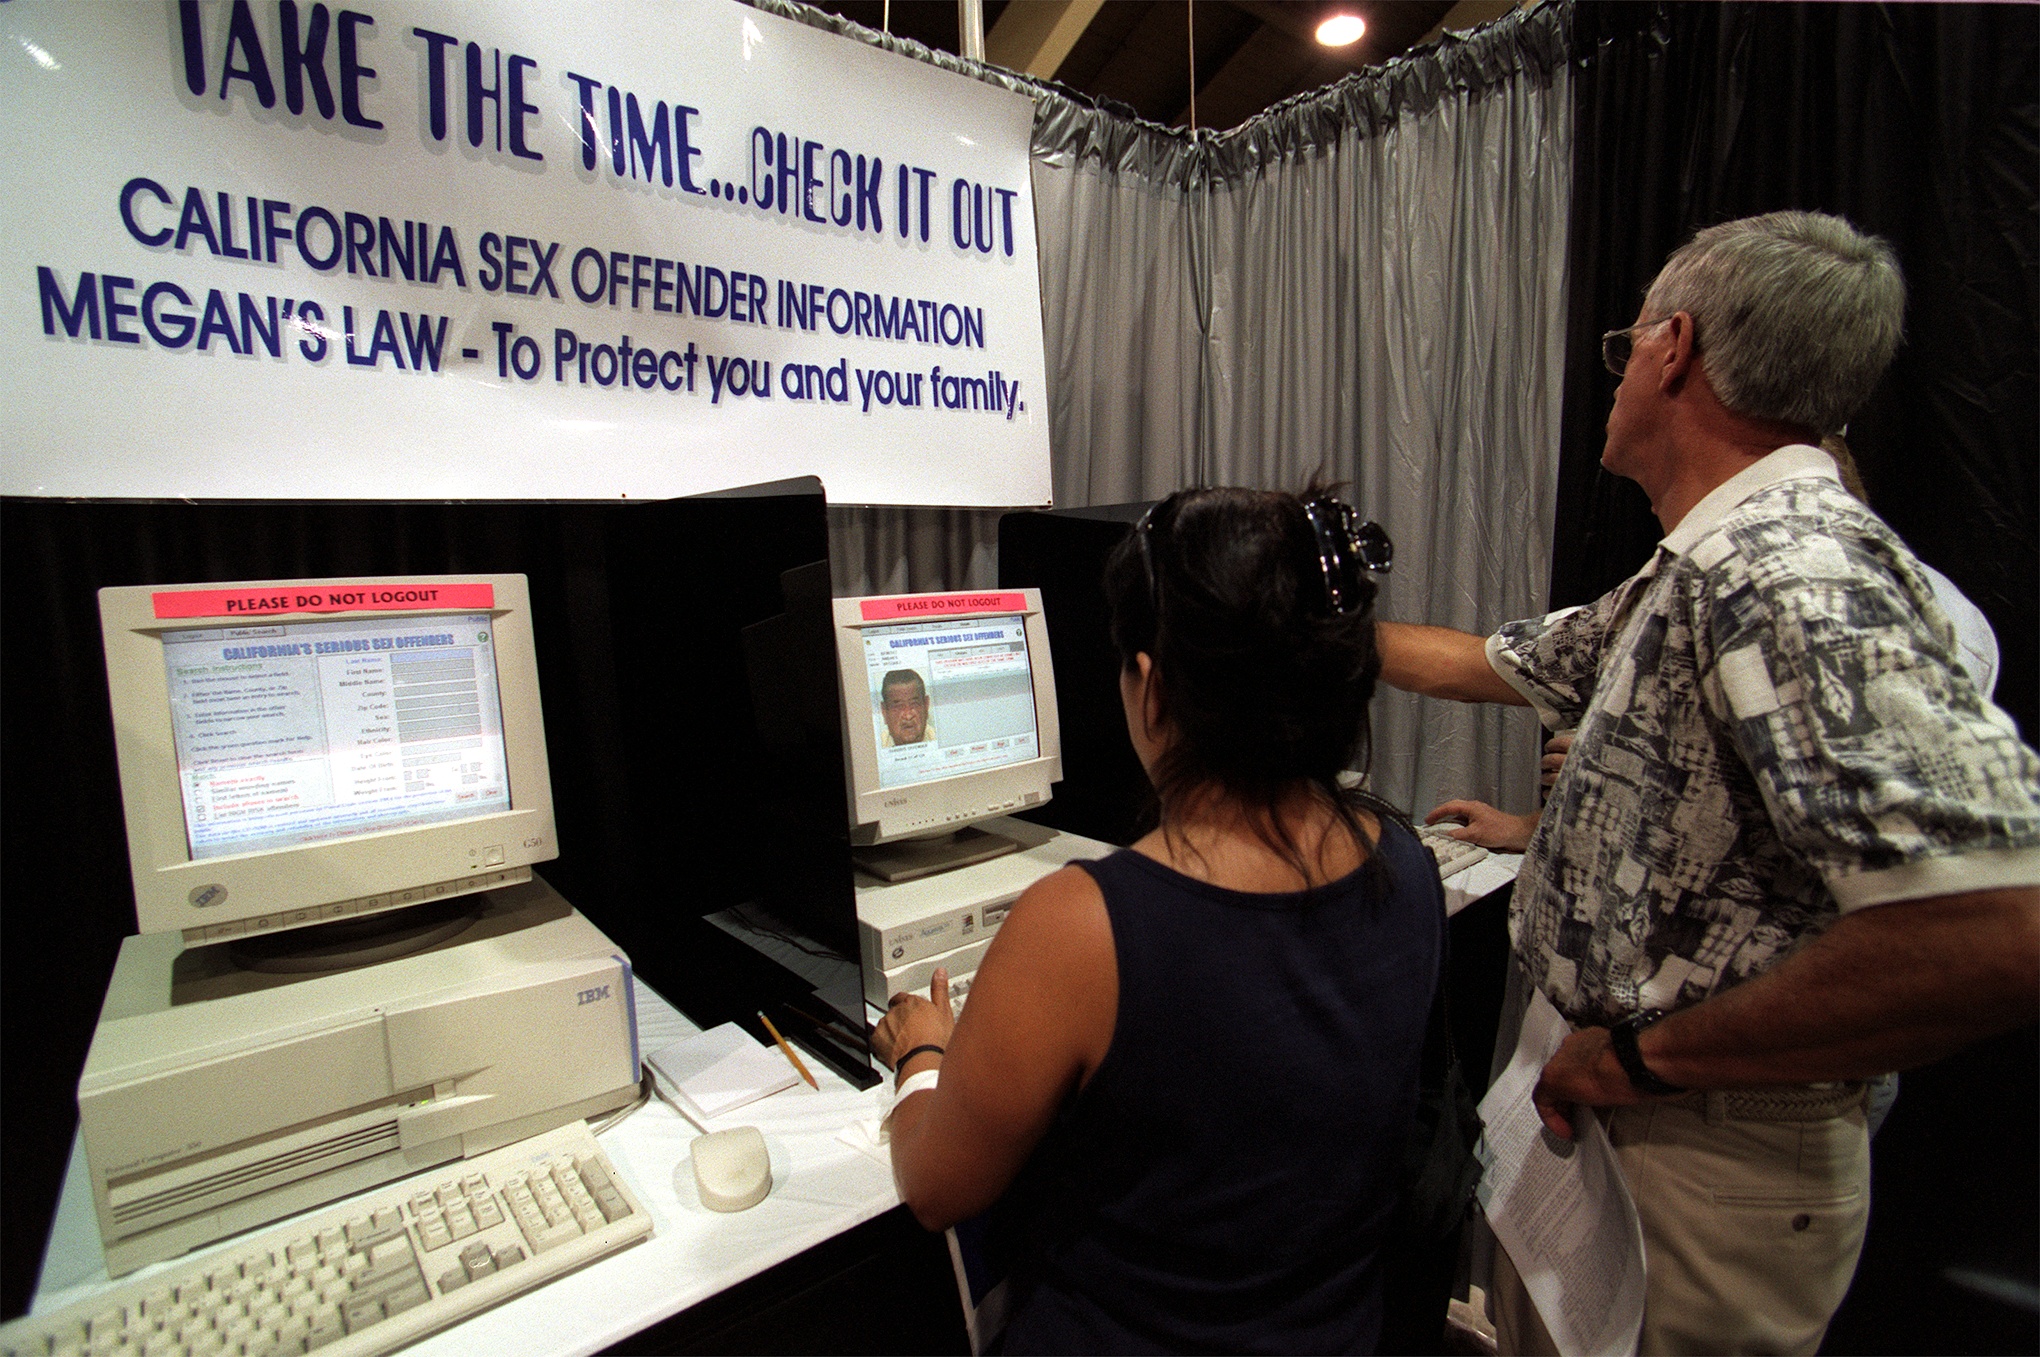 At the Los Angeles County Fair in Pomona, a booth was set up for fairgoers to check on sex offenders in their neighborhood under the Megan's Law. (Lawrence K. Ho/LA Times —Getty Images)